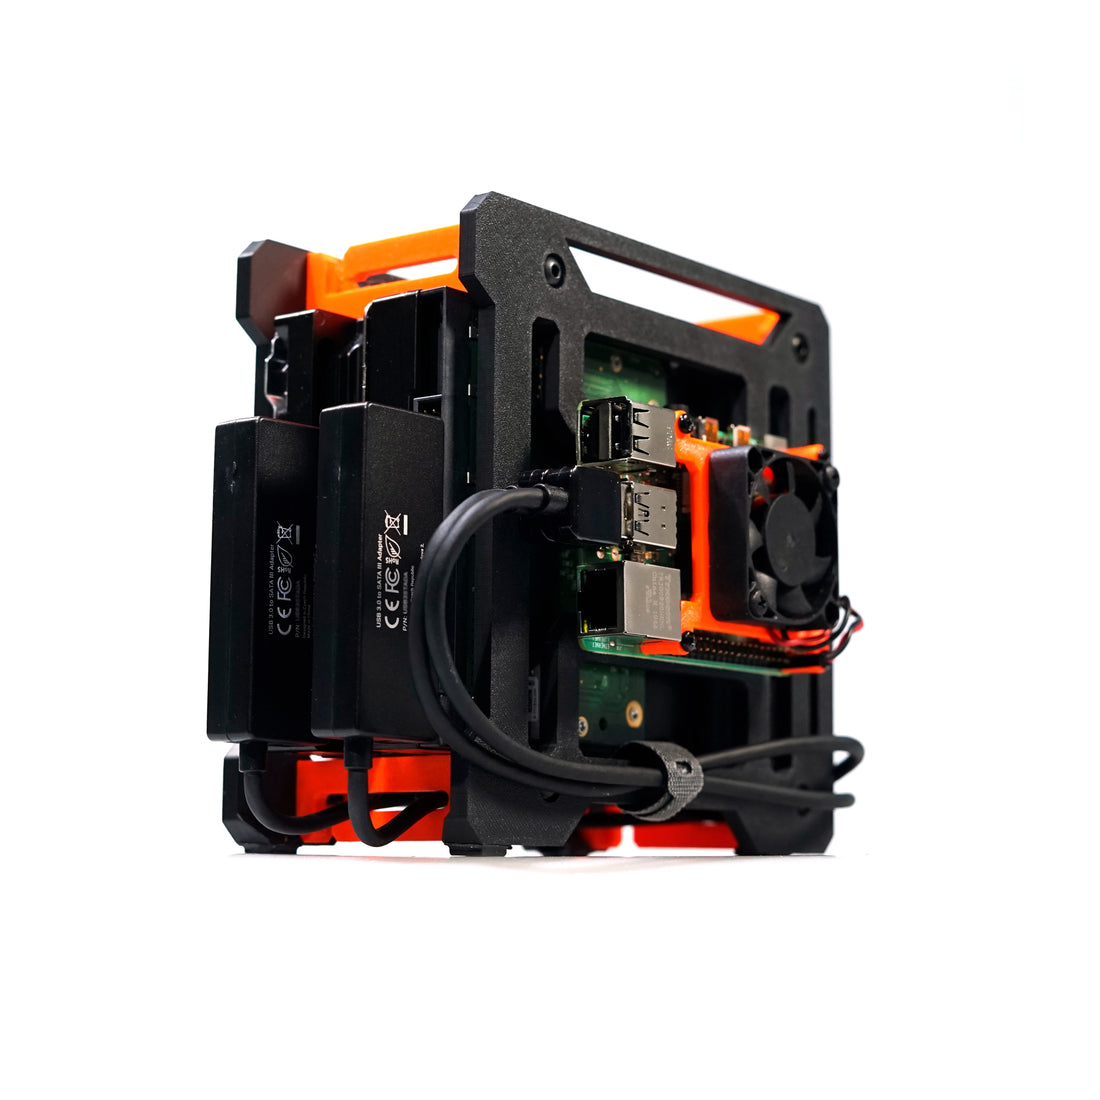 TerraPi Xtreme Duo Open Frame Case for Raspberry Pi and 2x 3.5" HDD Drives 3D STL Print File